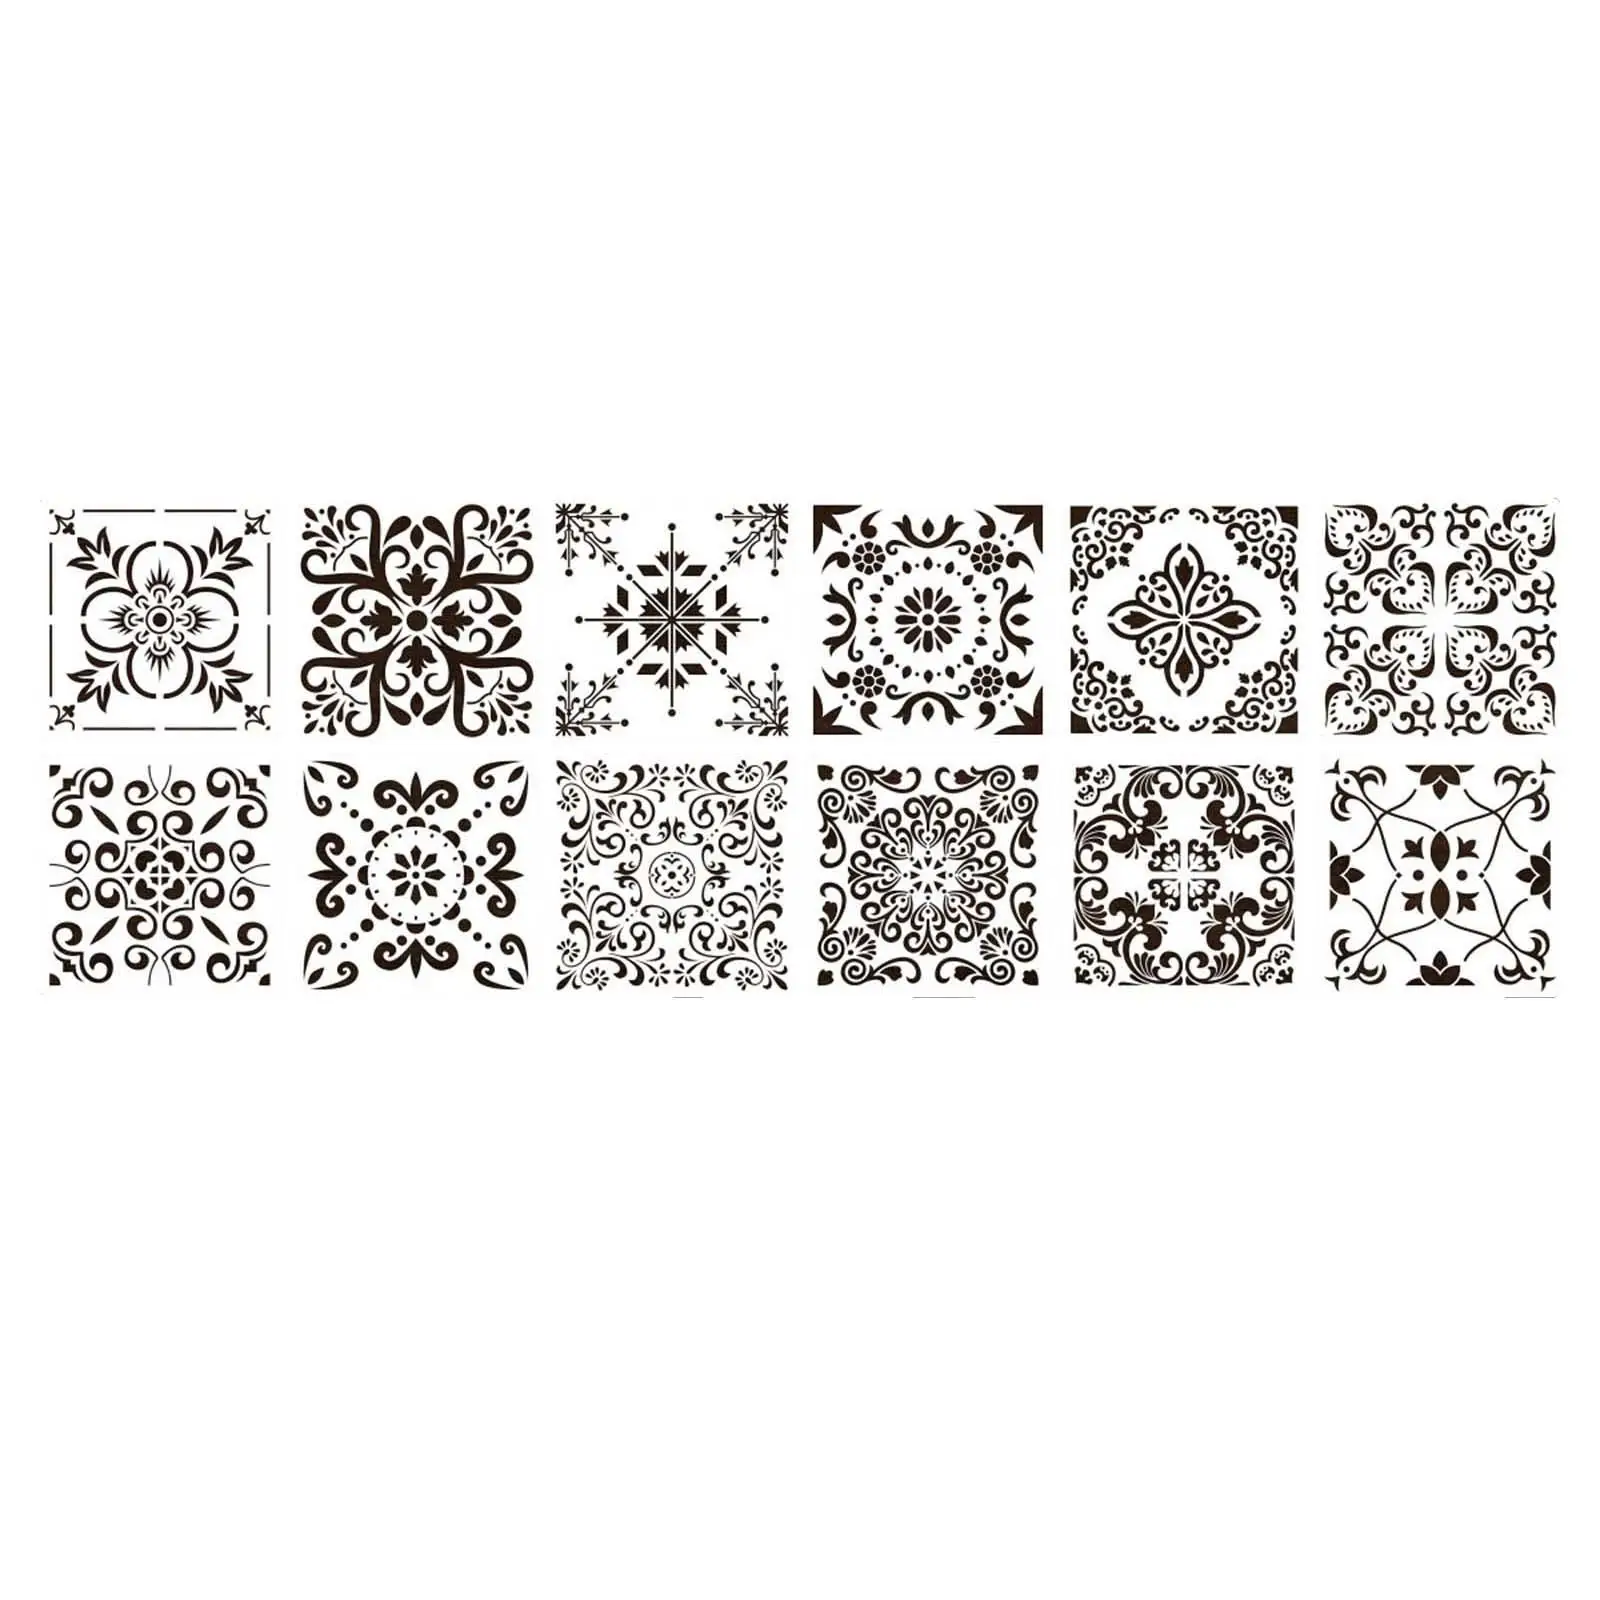 12x Mandala Stencil Template Reused Drawing Templates for Floor Furniture Walls Home